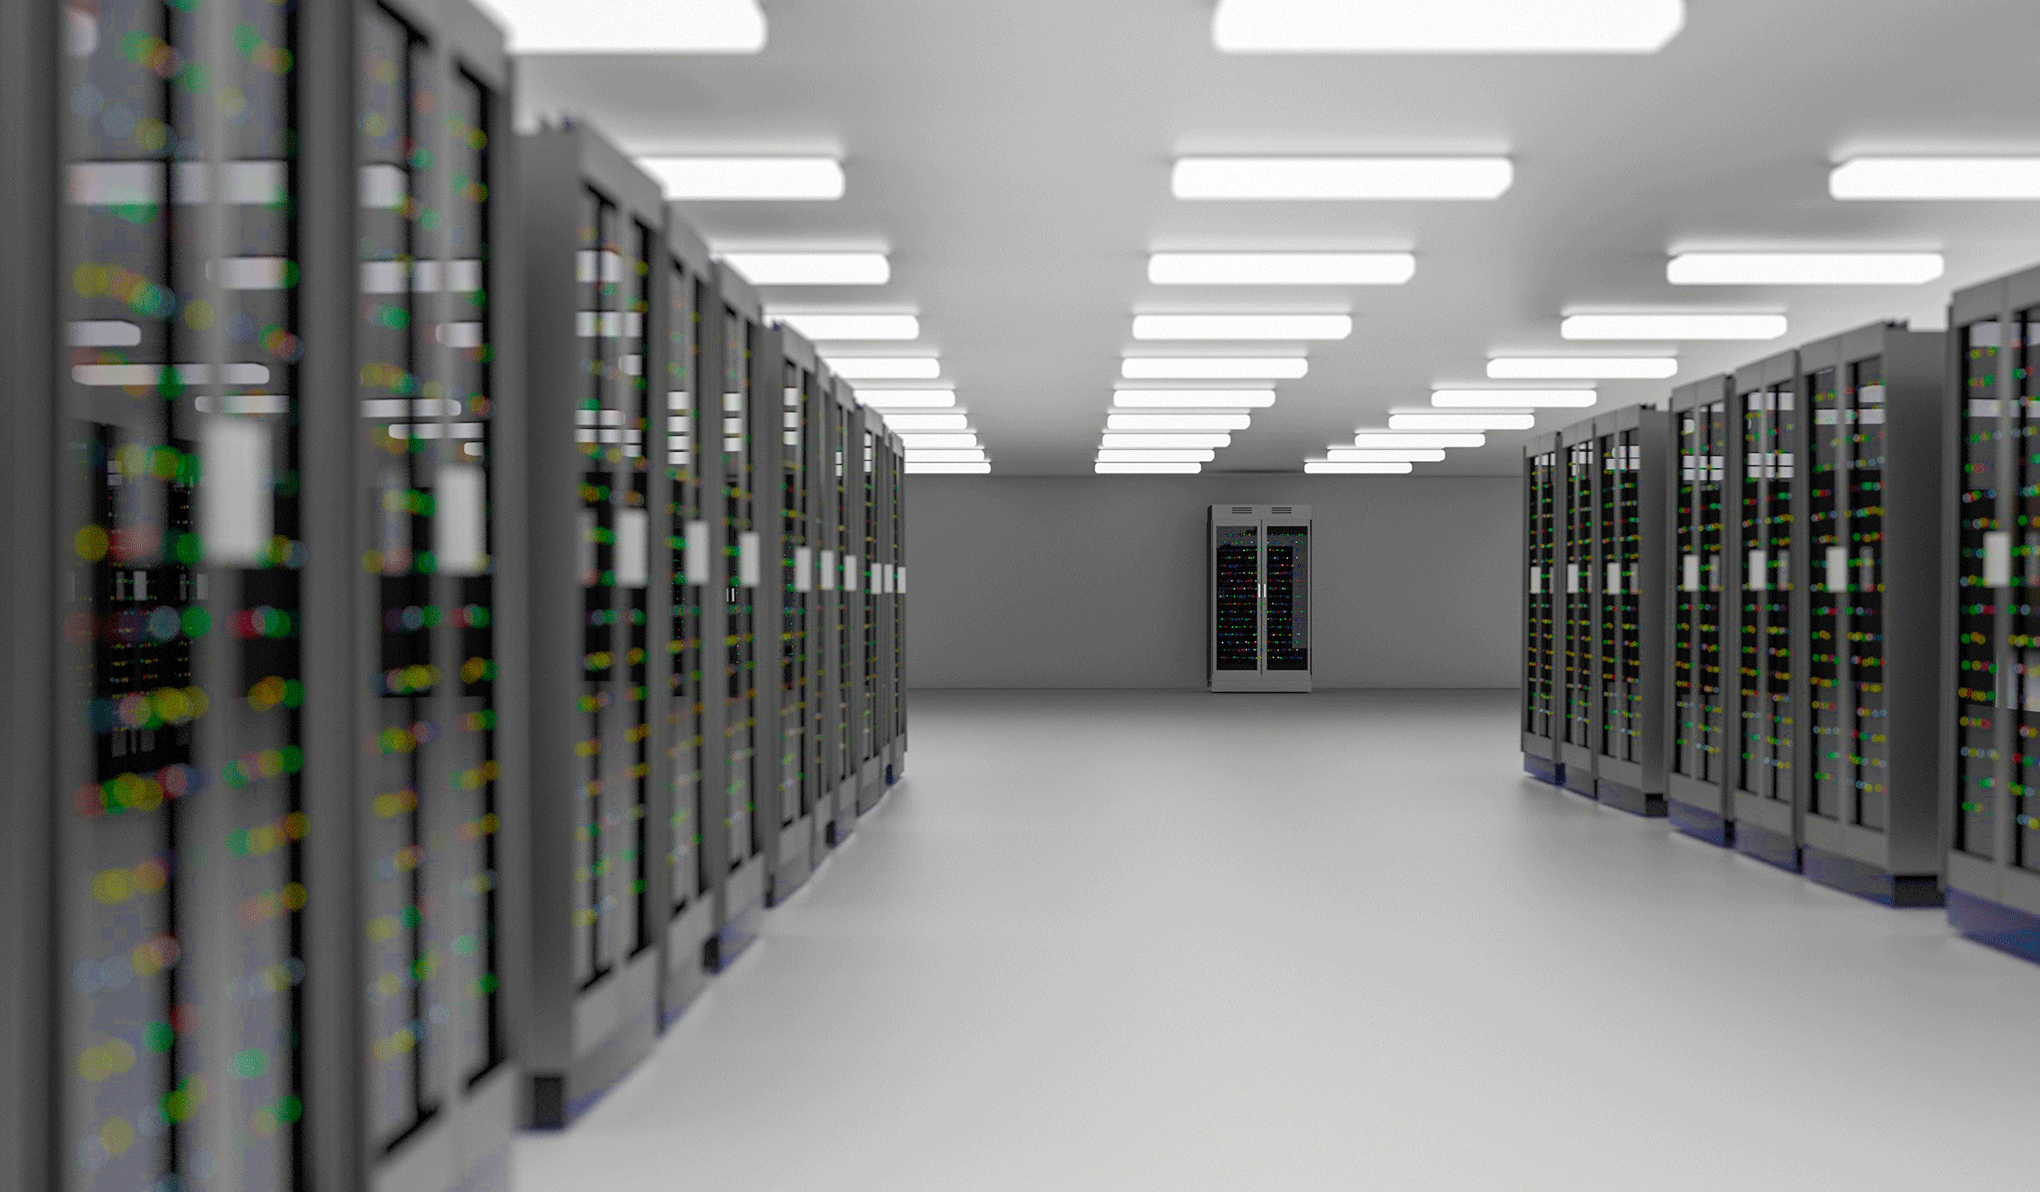 How to Properly Decommission a Data Center or Colocation “Colo” Data Center